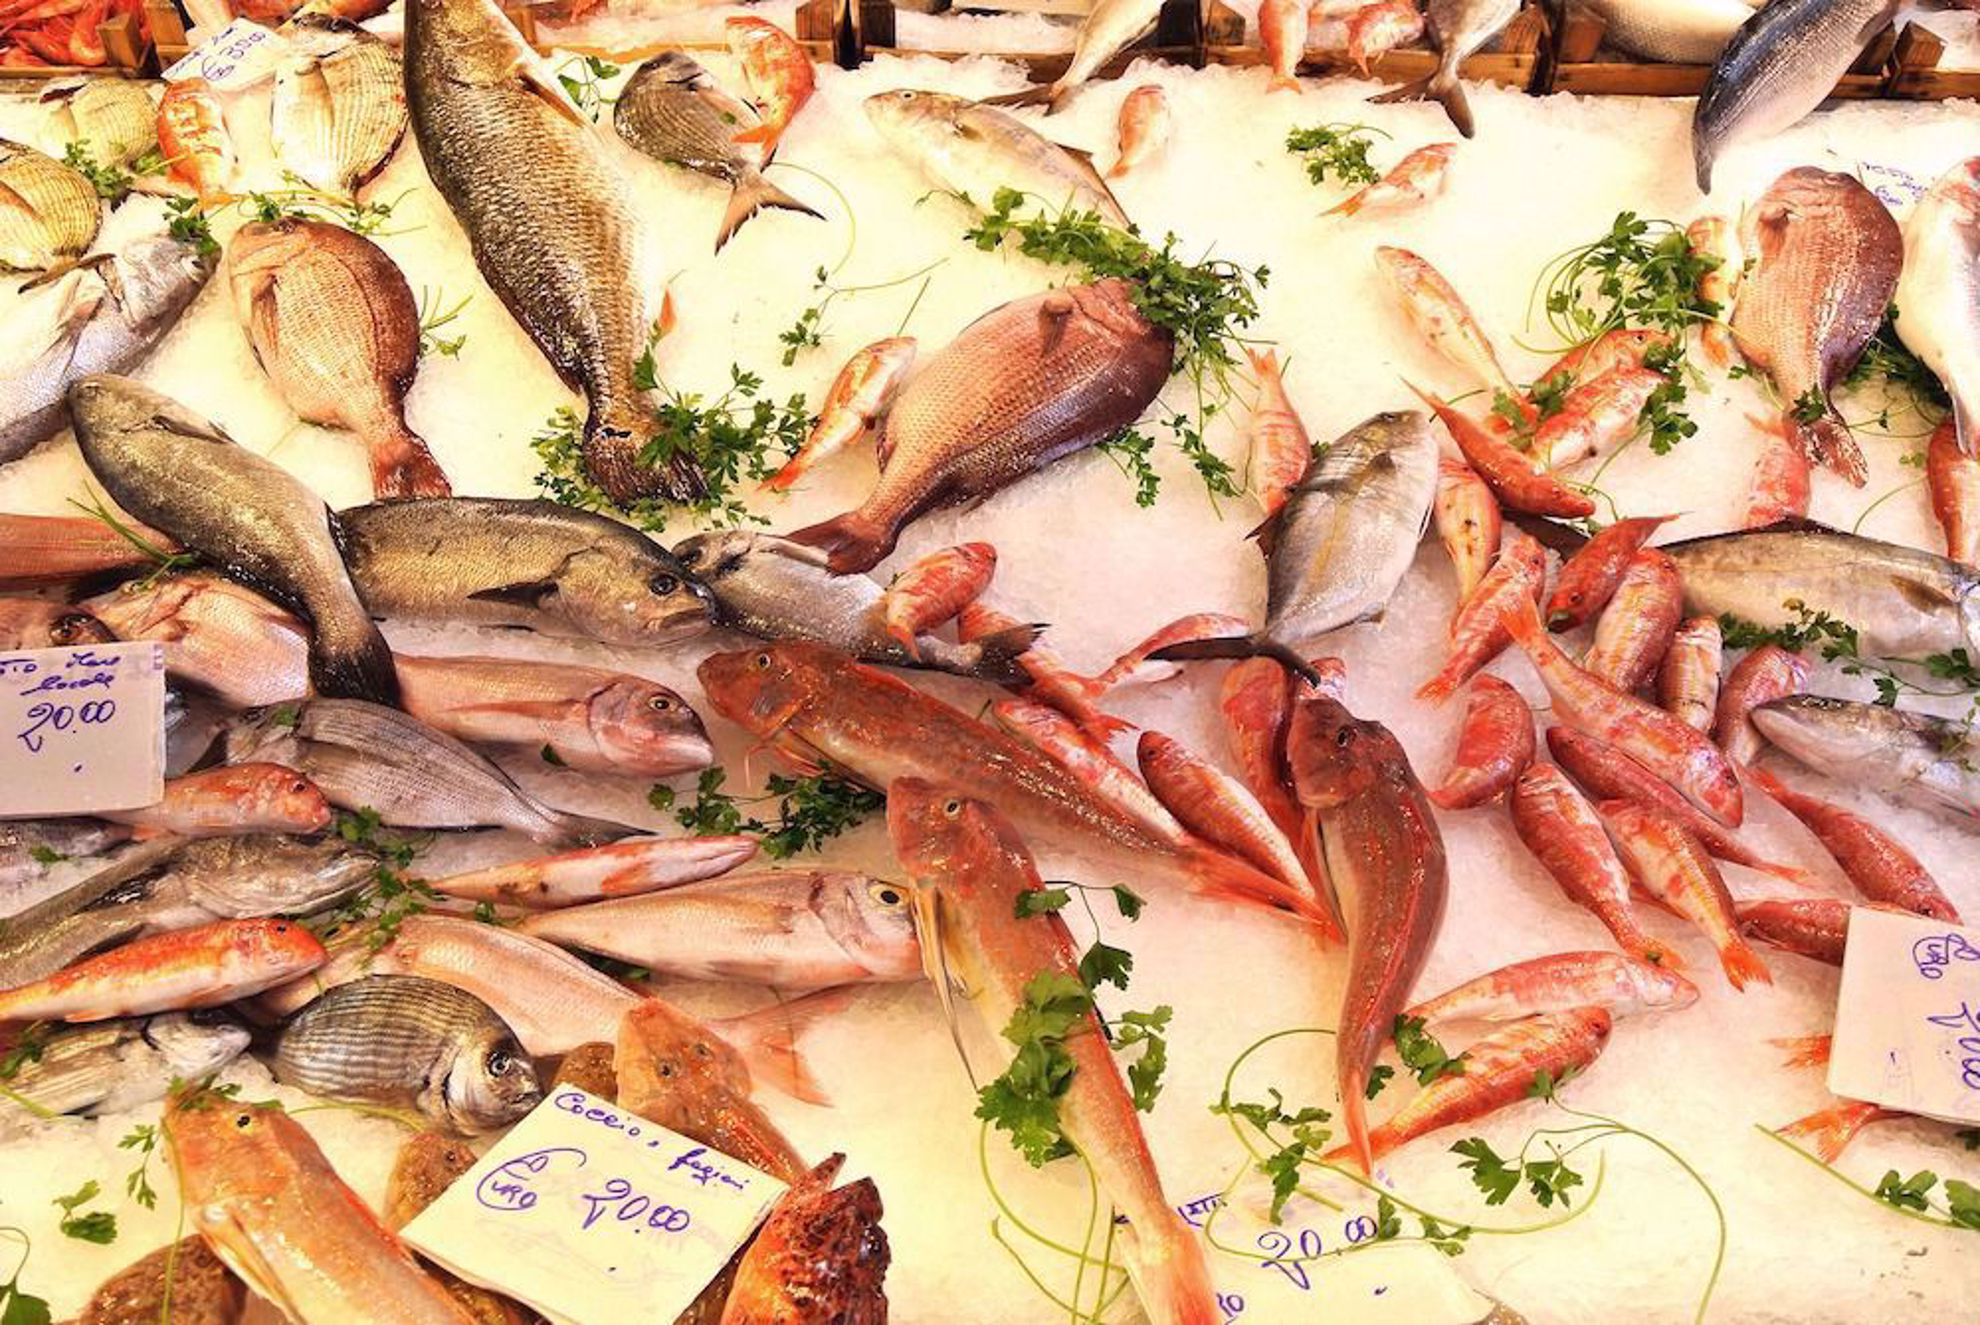 Fish at the market in Sicily